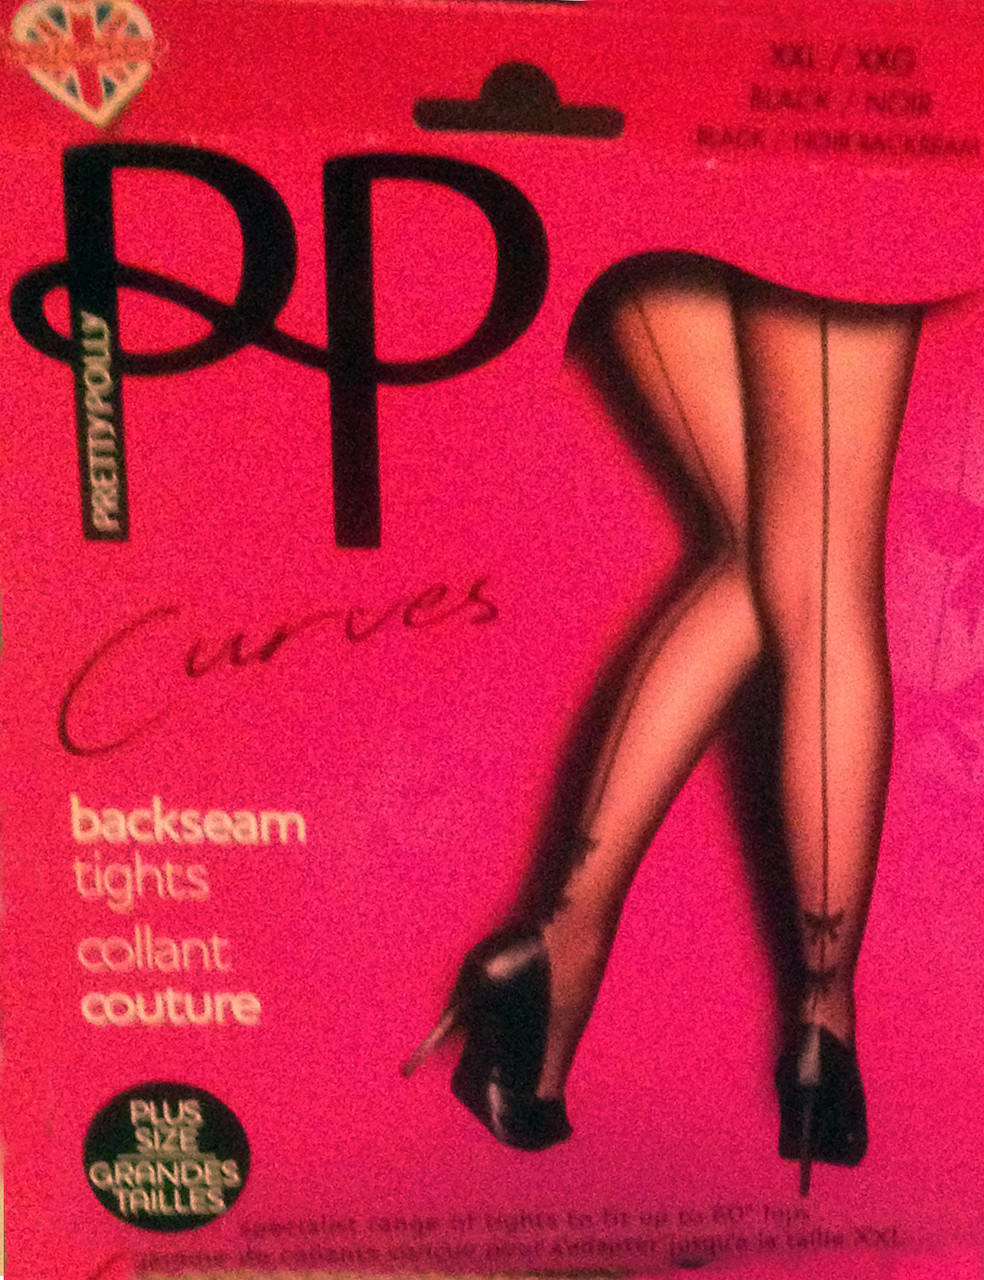 https://cdn10.bigcommerce.com/s-c759a6ct65/products/271/images/692/Pretty_Polly_Plus_tights_backseam_w_bows__43522.1479938929.1280.1280.jpg?c=2